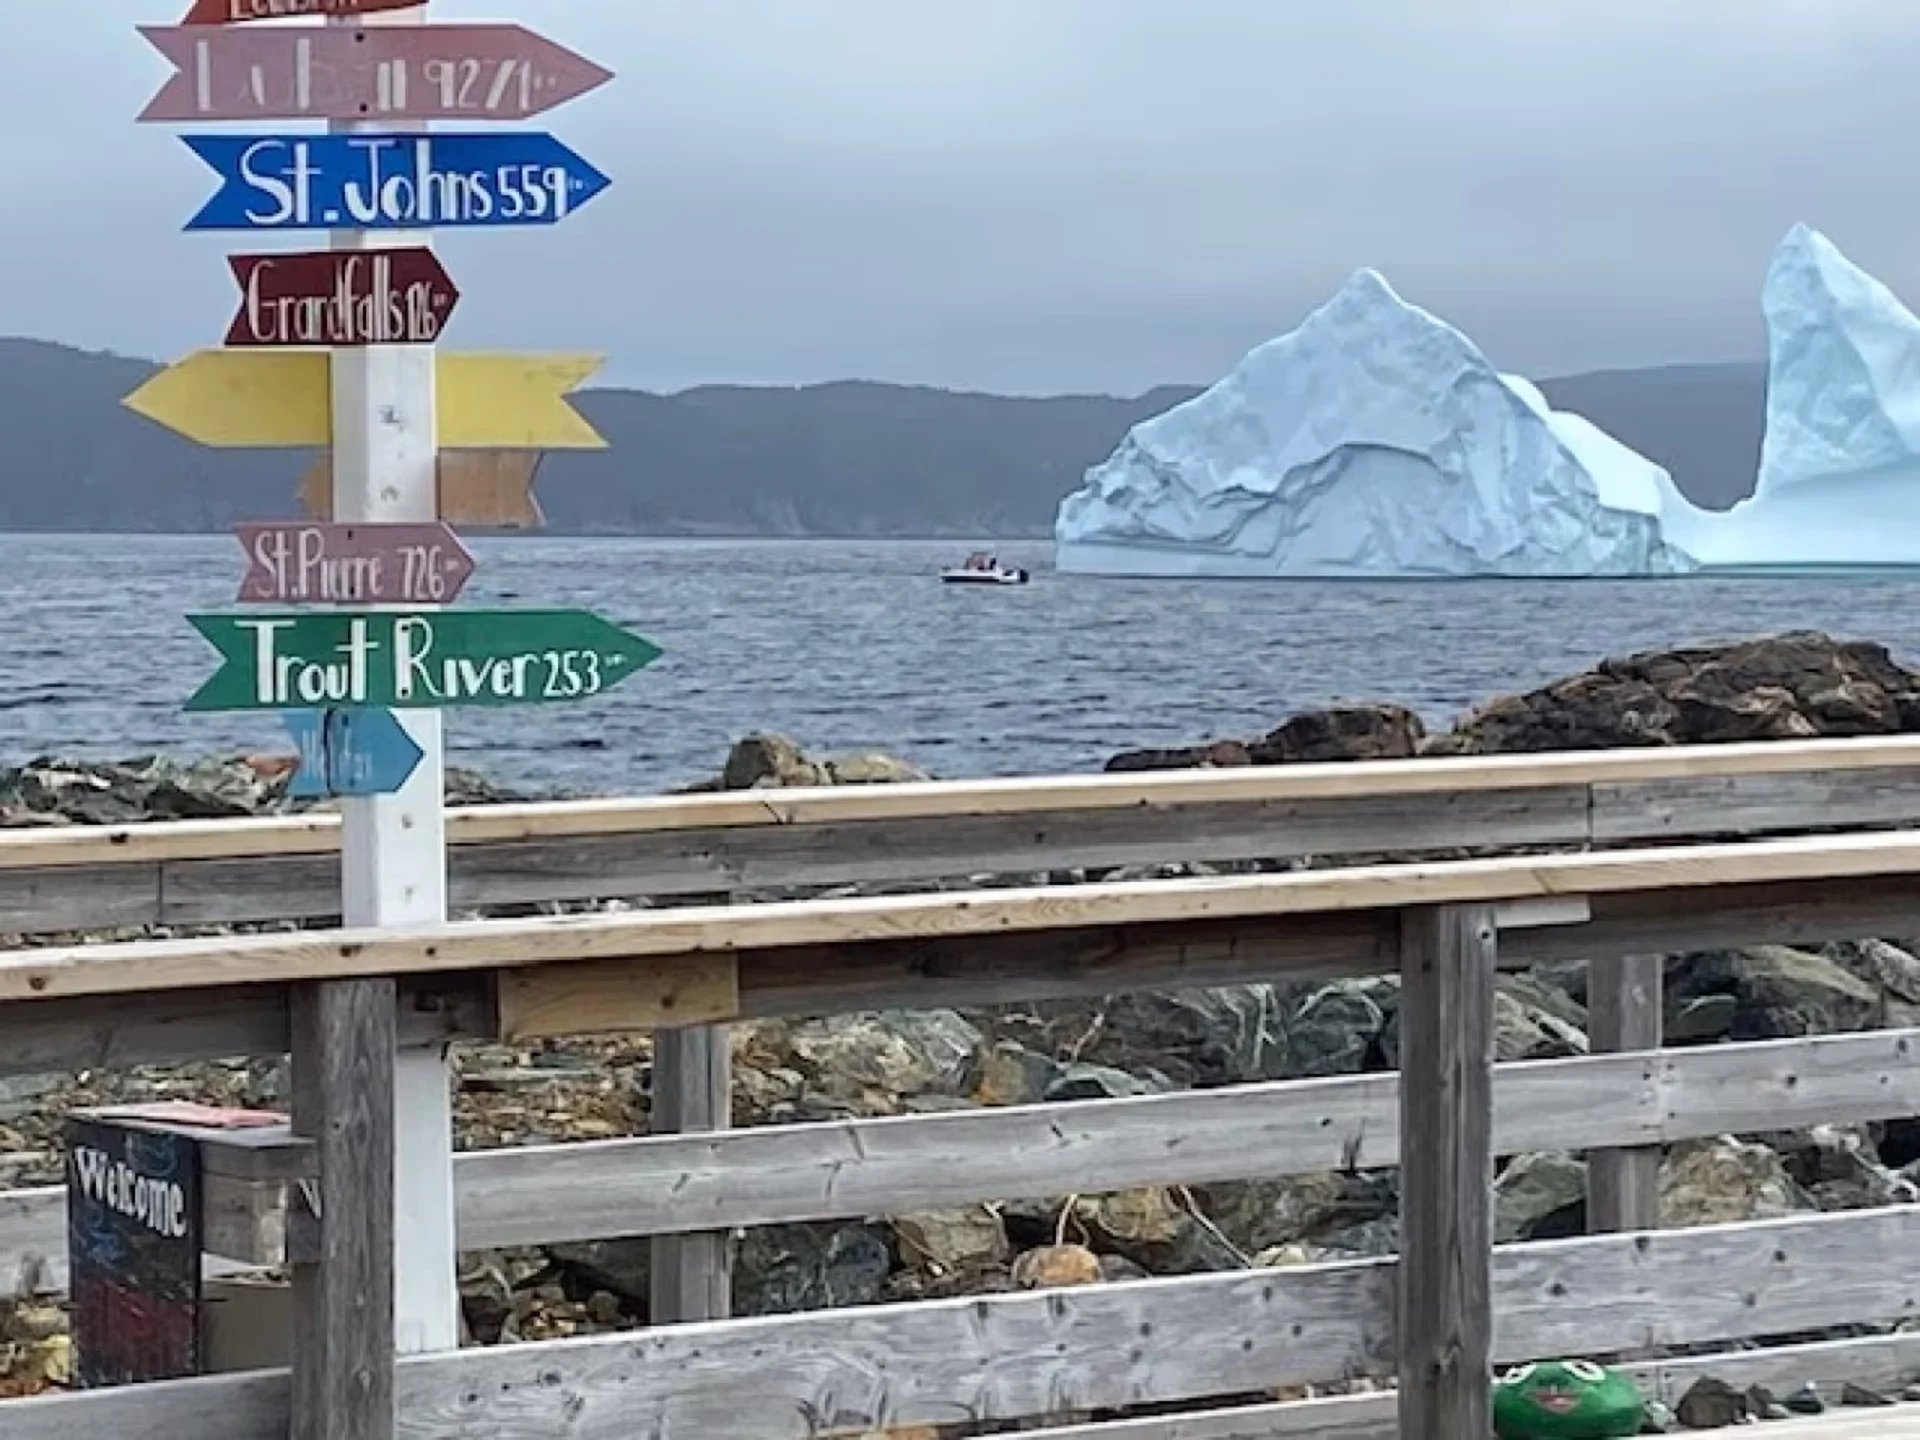 Northeast coast of Newfoundland is the place to see an iceberg & whales